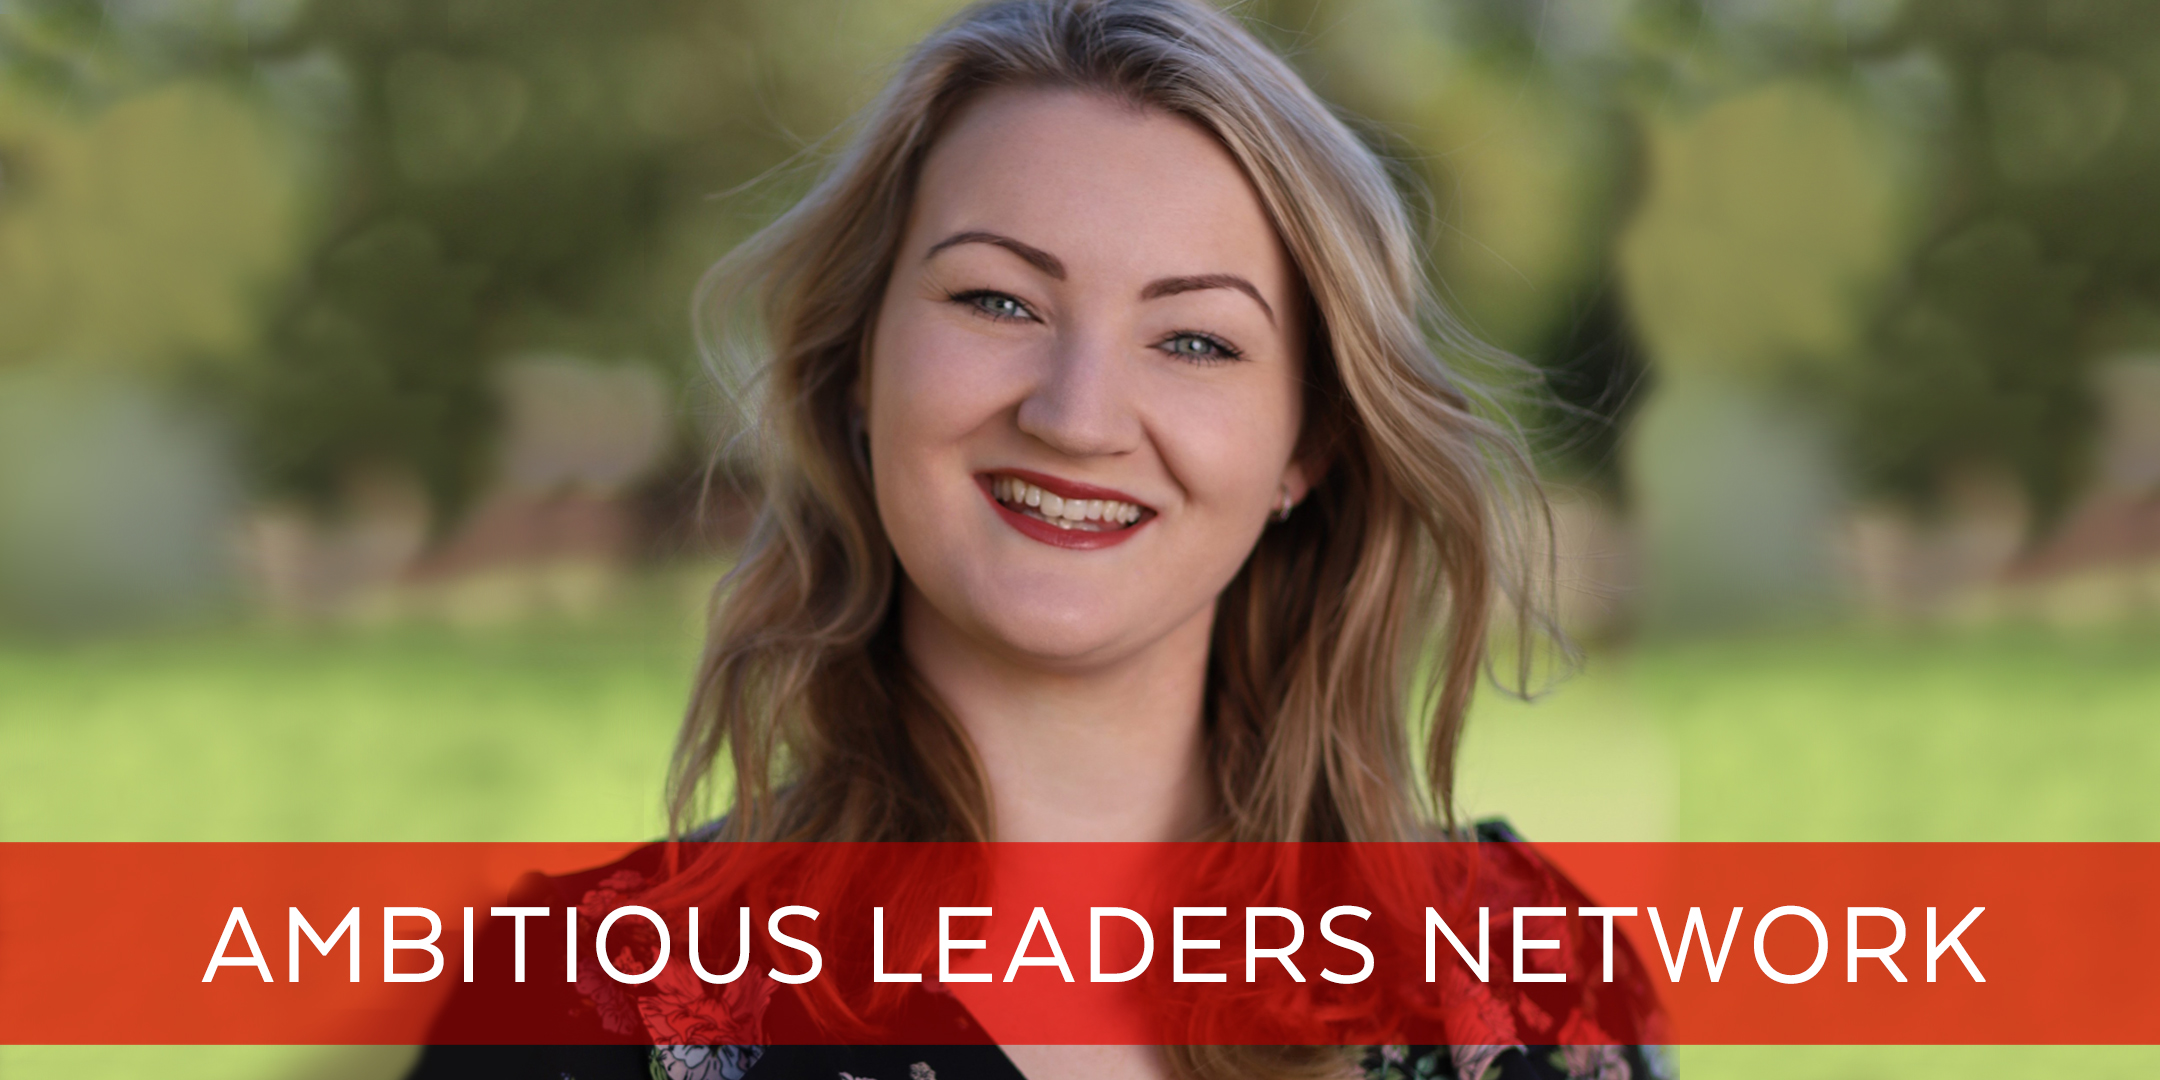 Ambitious Leaders Network - Alana Magee